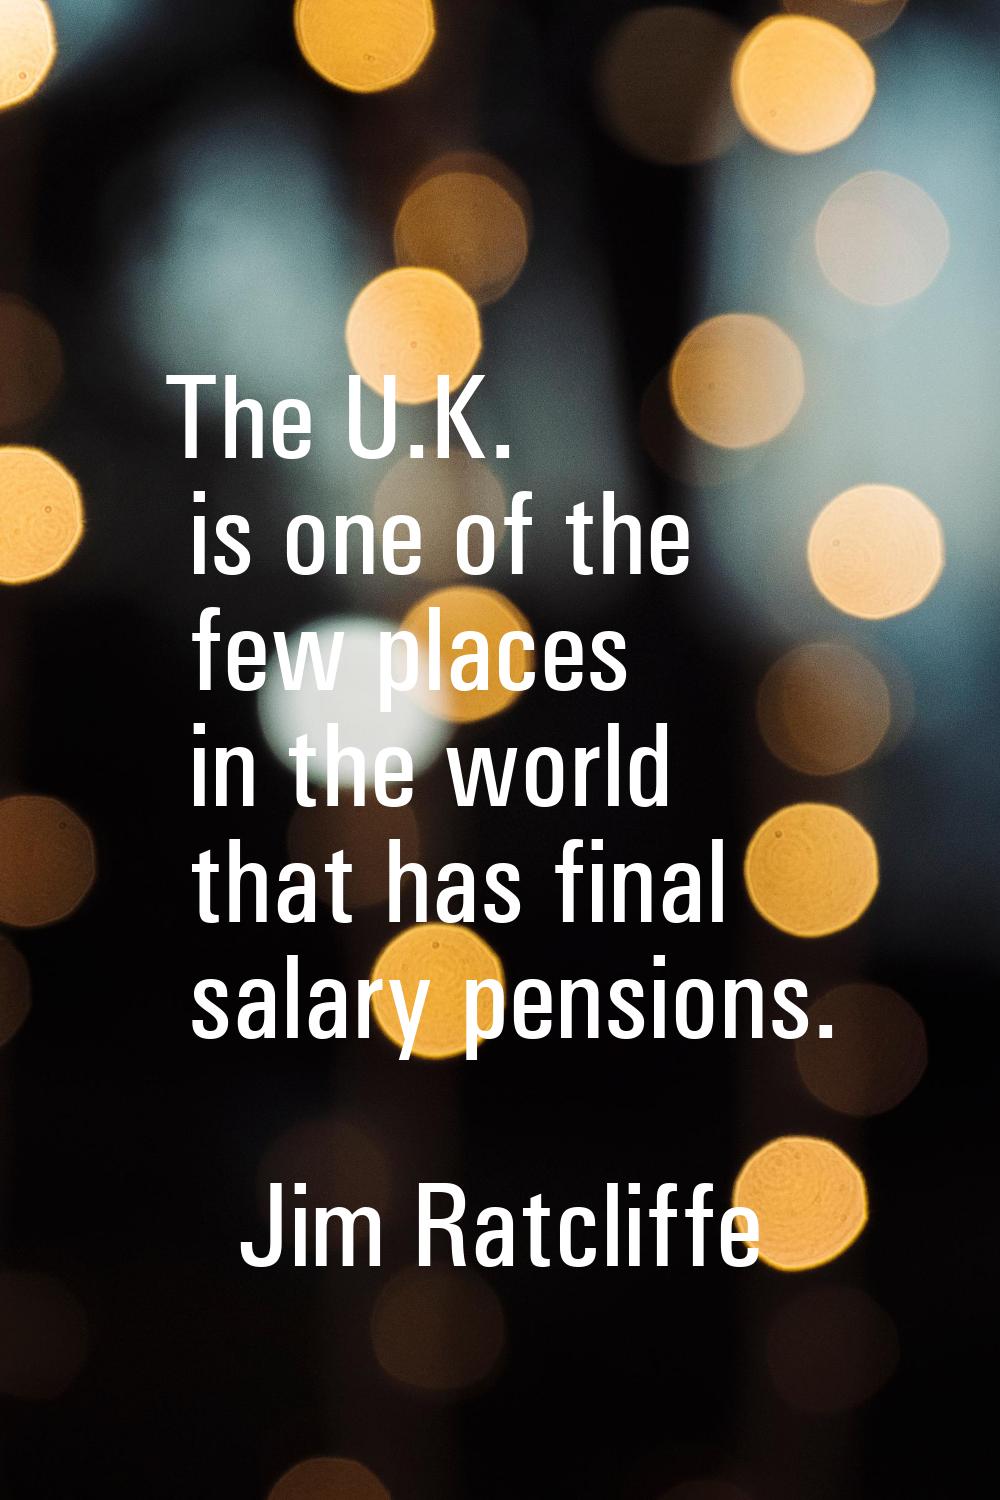 The U.K. is one of the few places in the world that has final salary pensions.